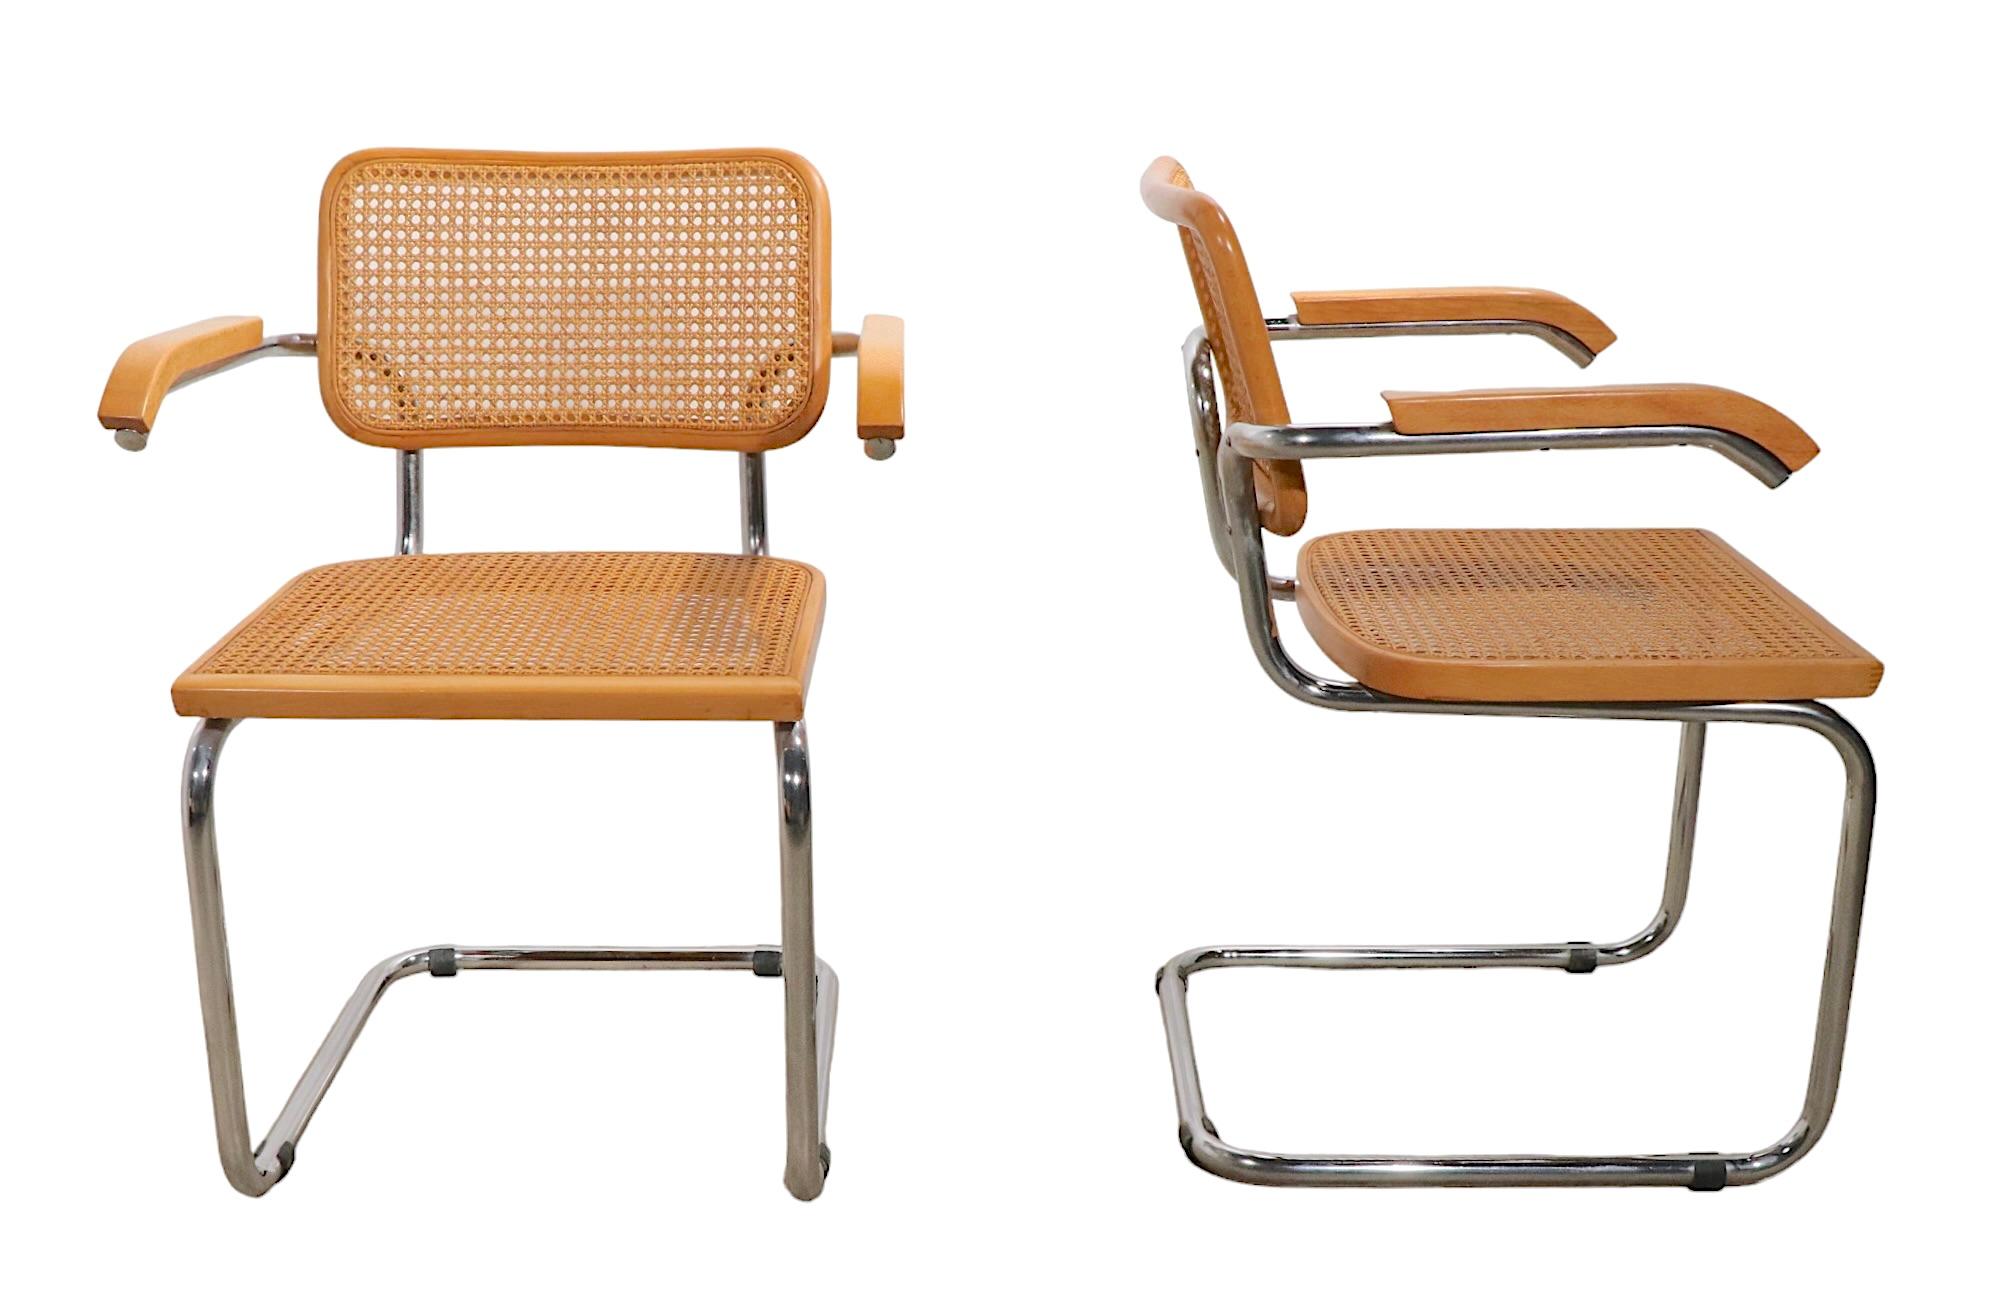 Late 20th Century Pr. Breuer Cesca Chairs Made in Italy, C 1970's